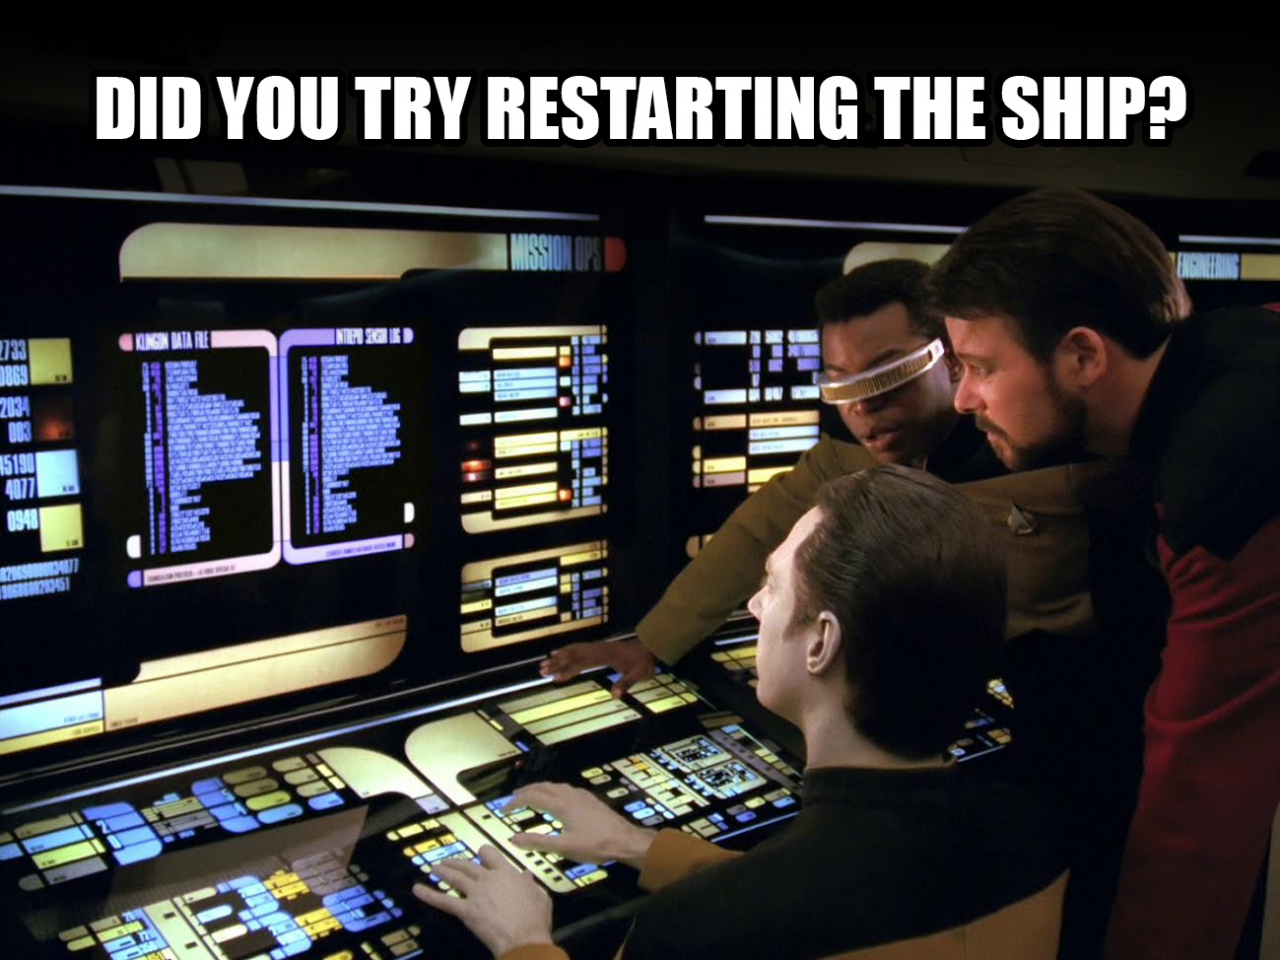 Space dudes trying to figure out a complex interface. "Did you try restarting the ship?"